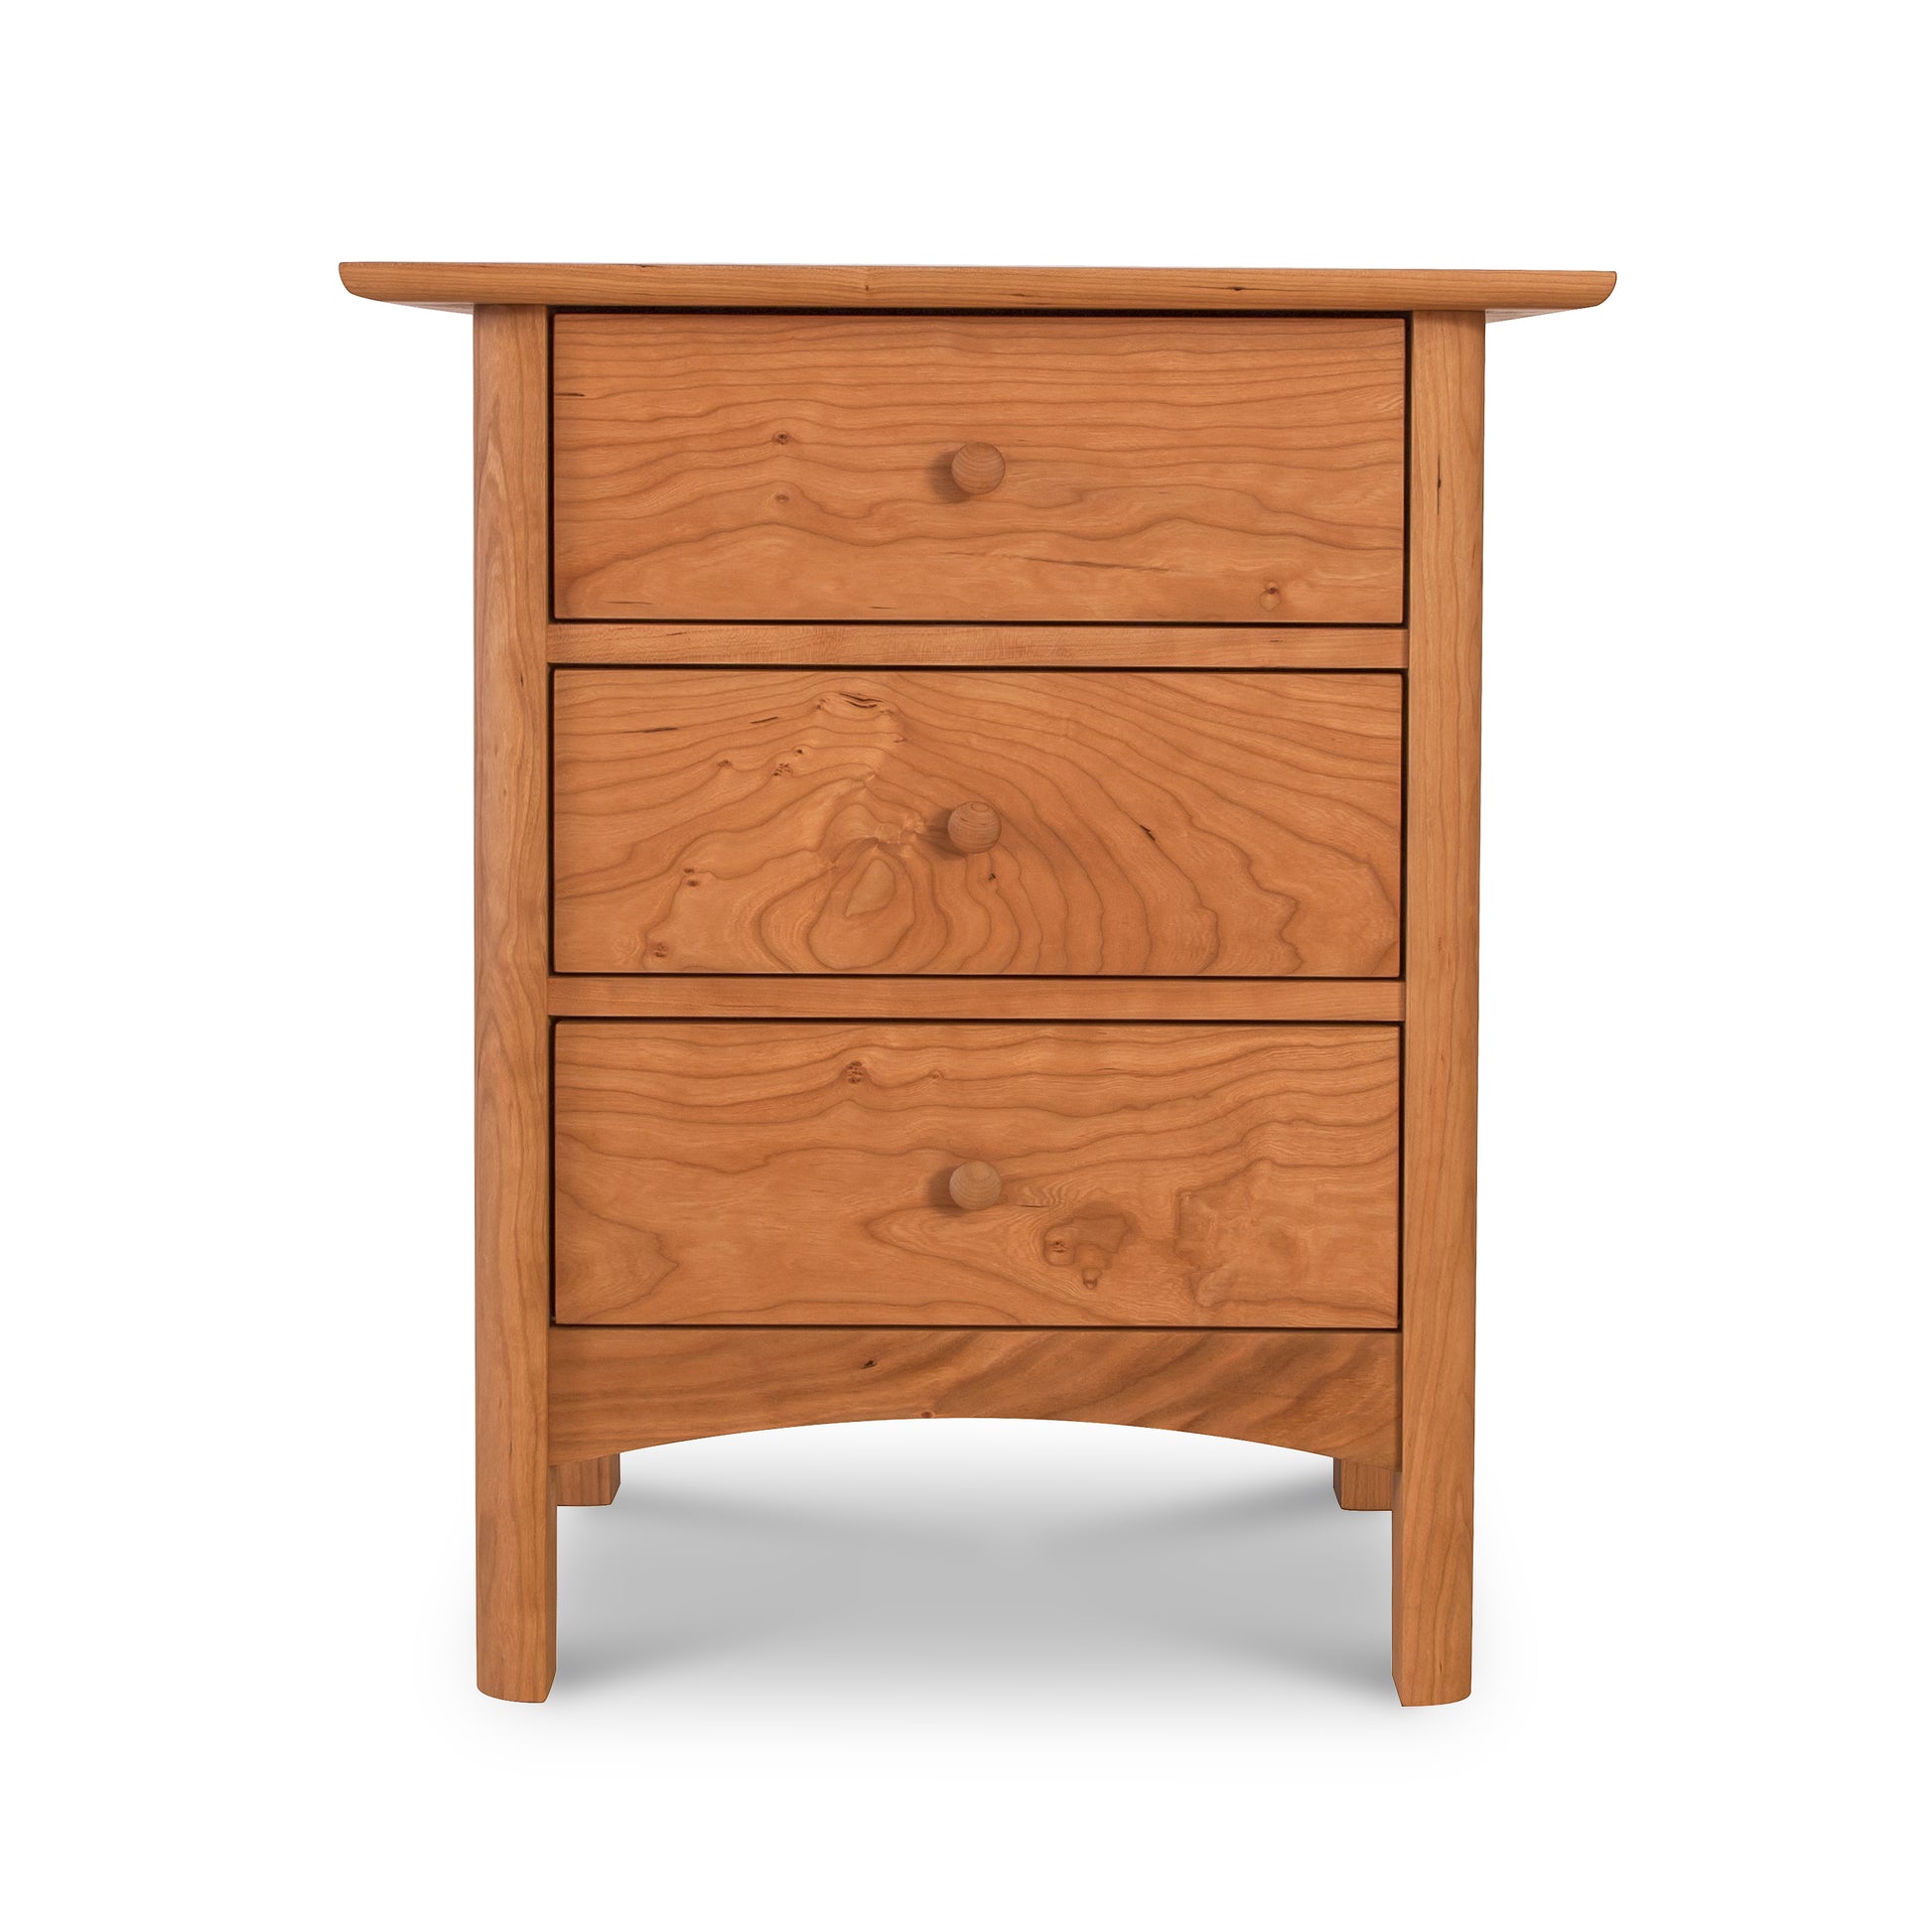 A wooden Heartwood Shaker 3-Drawer Nightstand from Vermont Furniture Designs isolated on a white background.